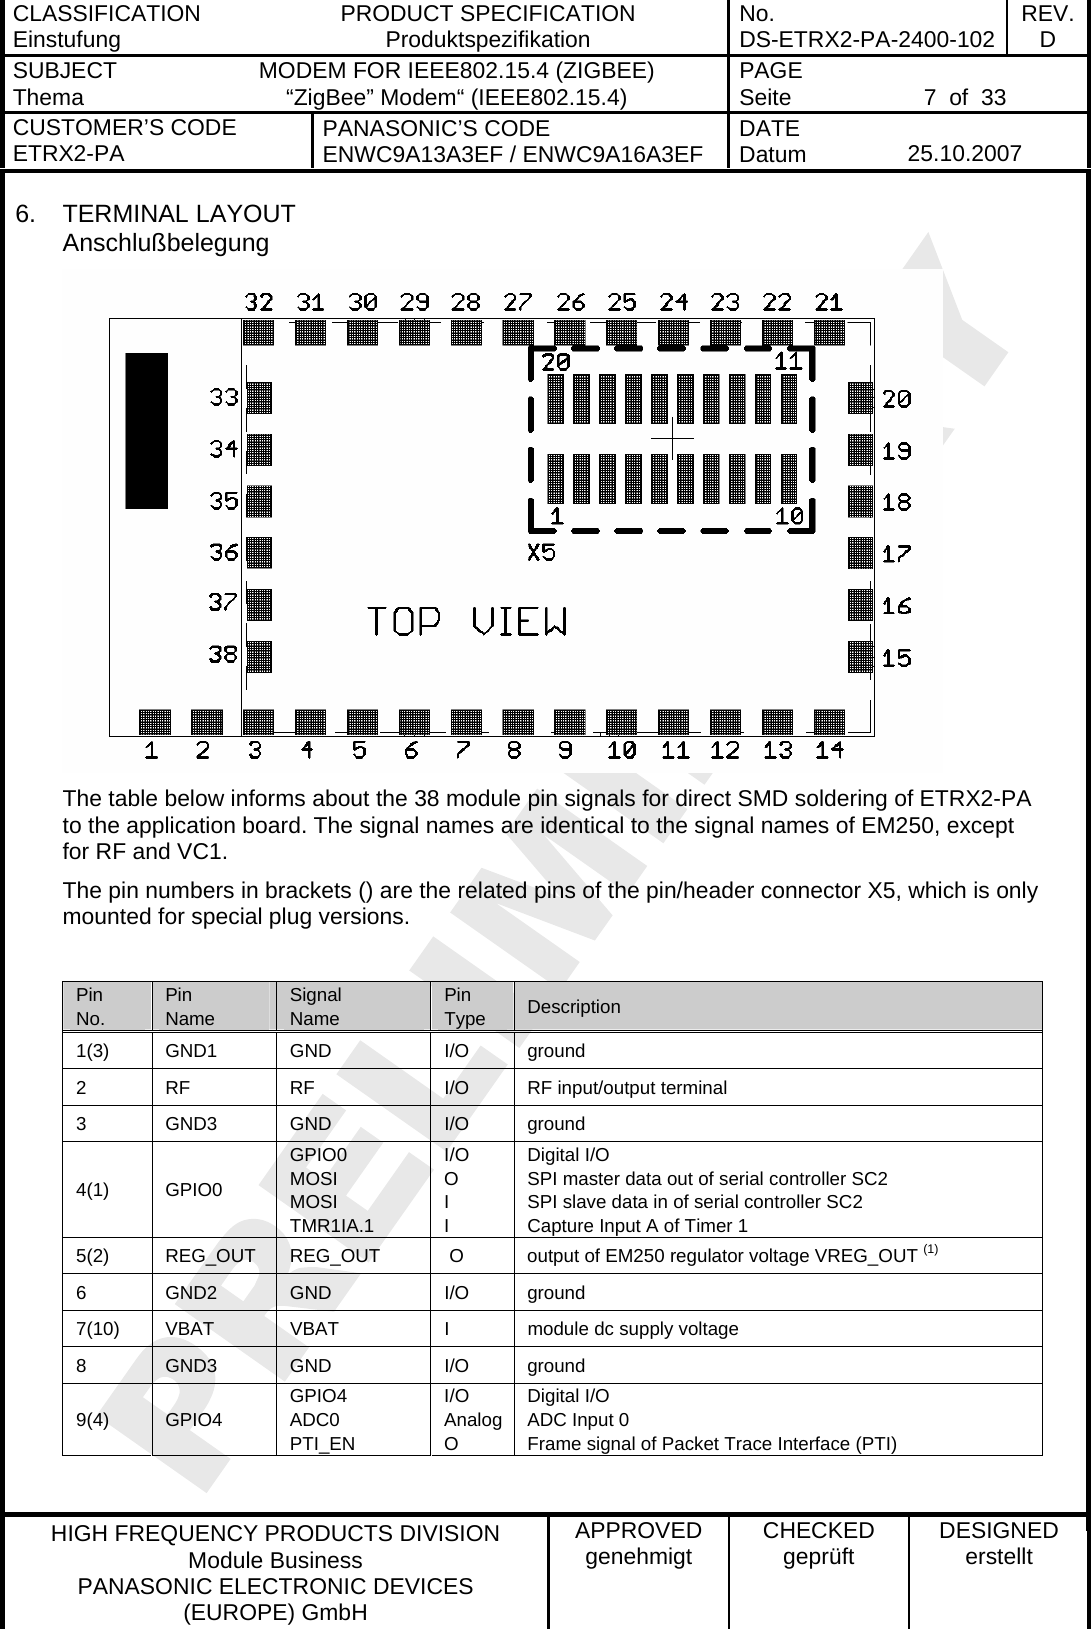 CLASSIFICATION Einstufung  PRODUCT SPECIFICATION Produktspezifikation  No. DS-ETRX2-PA-2400-102 REV.D SUBJECT Thema  MODEM FOR IEEE802.15.4 (ZIGBEE) “ZigBee” Modem“ (IEEE802.15.4)    PAGE Seite   7  of  33 CUSTOMER’S CODE ETRX2-PA  PANASONIC’S CODE ENWC9A13A3EF / ENWC9A16A3EF  DATE Datum   25.10.2007   HIGH FREQUENCY PRODUCTS DIVISION Module Business PANASONIC ELECTRONIC DEVICES  (EUROPE) GmbH APPROVED genehmigt  CHECKED geprüft  DESIGNED erstellt 6. TERMINAL LAYOUT Anschlußbelegung  The table below informs about the 38 module pin signals for direct SMD soldering of ETRX2-PA to the application board. The signal names are identical to the signal names of EM250, except for RF and VC1.  The pin numbers in brackets () are the related pins of the pin/header connector X5, which is only mounted for special plug versions.   Pin No. Pin Name Signal Name Pin Type  Description 1(3) GND1  GND  I/O ground 2  RF  RF  I/O   RF input/output terminal 3 GND3 GND  I/O ground 4(1) GPIO0 GPIO0 MOSI MOSI TMR1IA.1 I/O O I I Digital I/O SPI master data out of serial controller SC2 SPI slave data in of serial controller SC2 Capture Input A of Timer 1 5(2)  REG_OUT  REG_OUT   O  output of EM250 regulator voltage VREG_OUT (1) 6 GND2 GND  I/O ground 7(10)  VBAT  VBAT  I  module dc supply voltage 8 GND3 GND  I/O ground 9(4) GPIO4 GPIO4 ADC0 PTI_EN I/O Analog O Digital I/O ADC Input 0 Frame signal of Packet Trace Interface (PTI)  